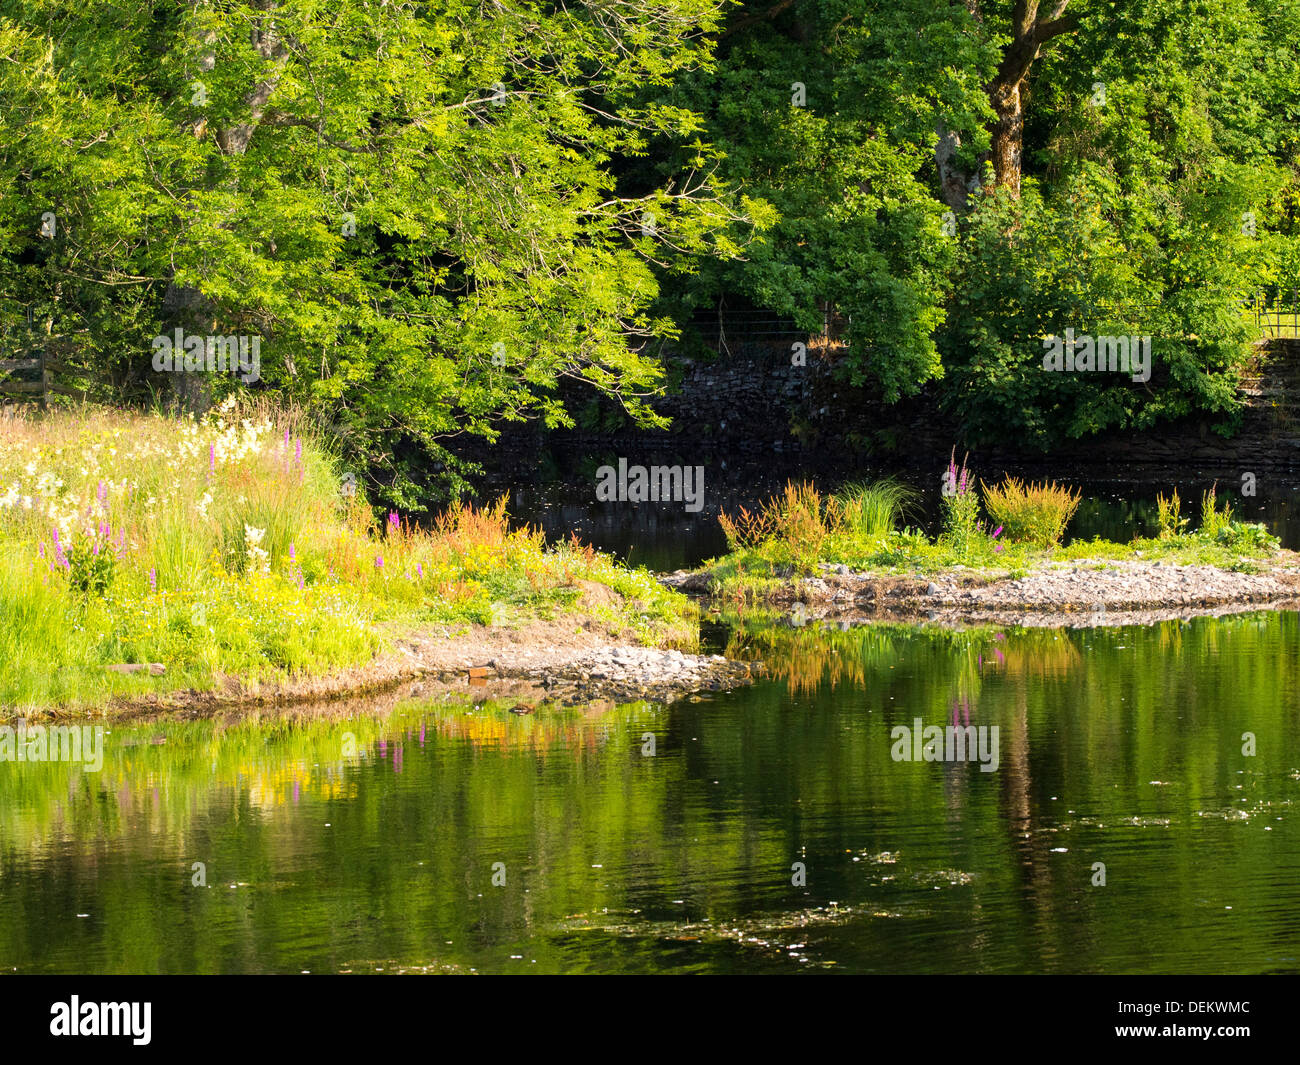 The meeting of the River Brathay and Rothay in Ambleside, Lake District, UK. Stock Photo